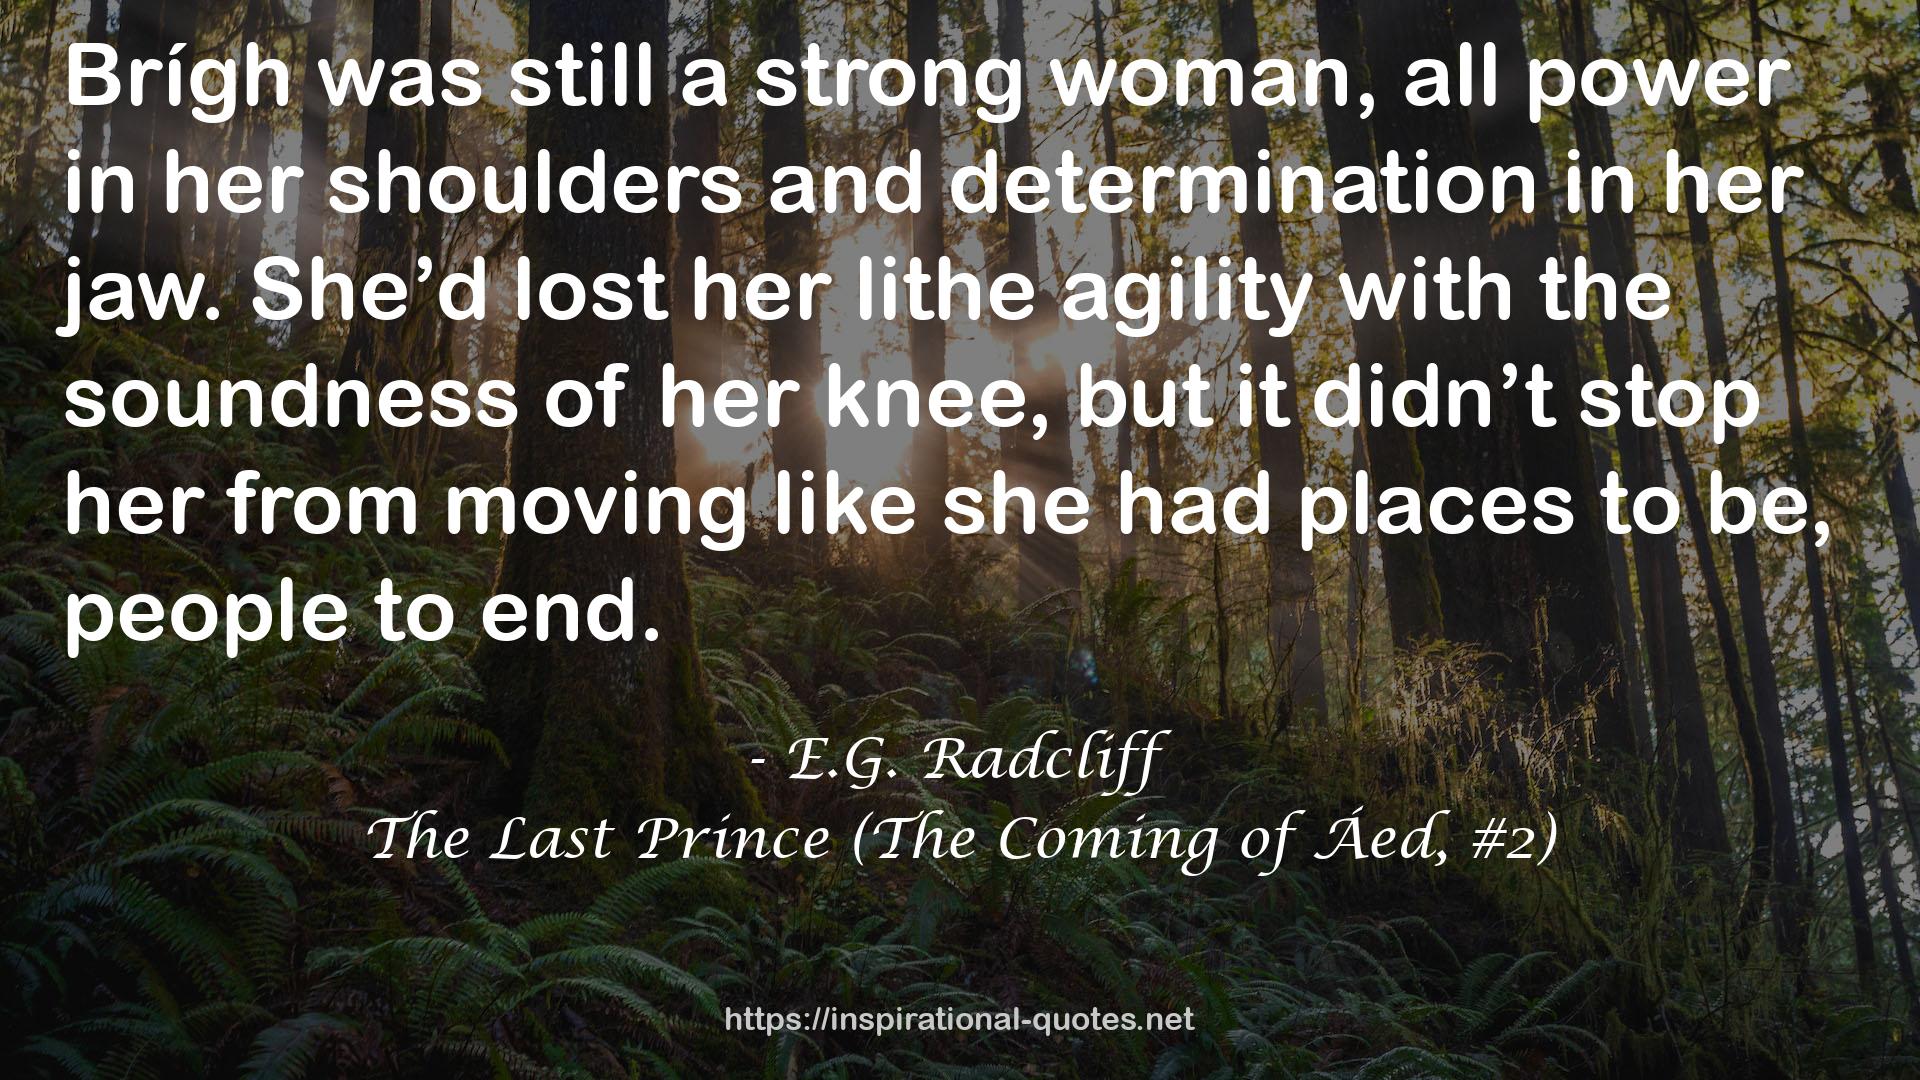 The Last Prince (The Coming of Áed, #2) QUOTES